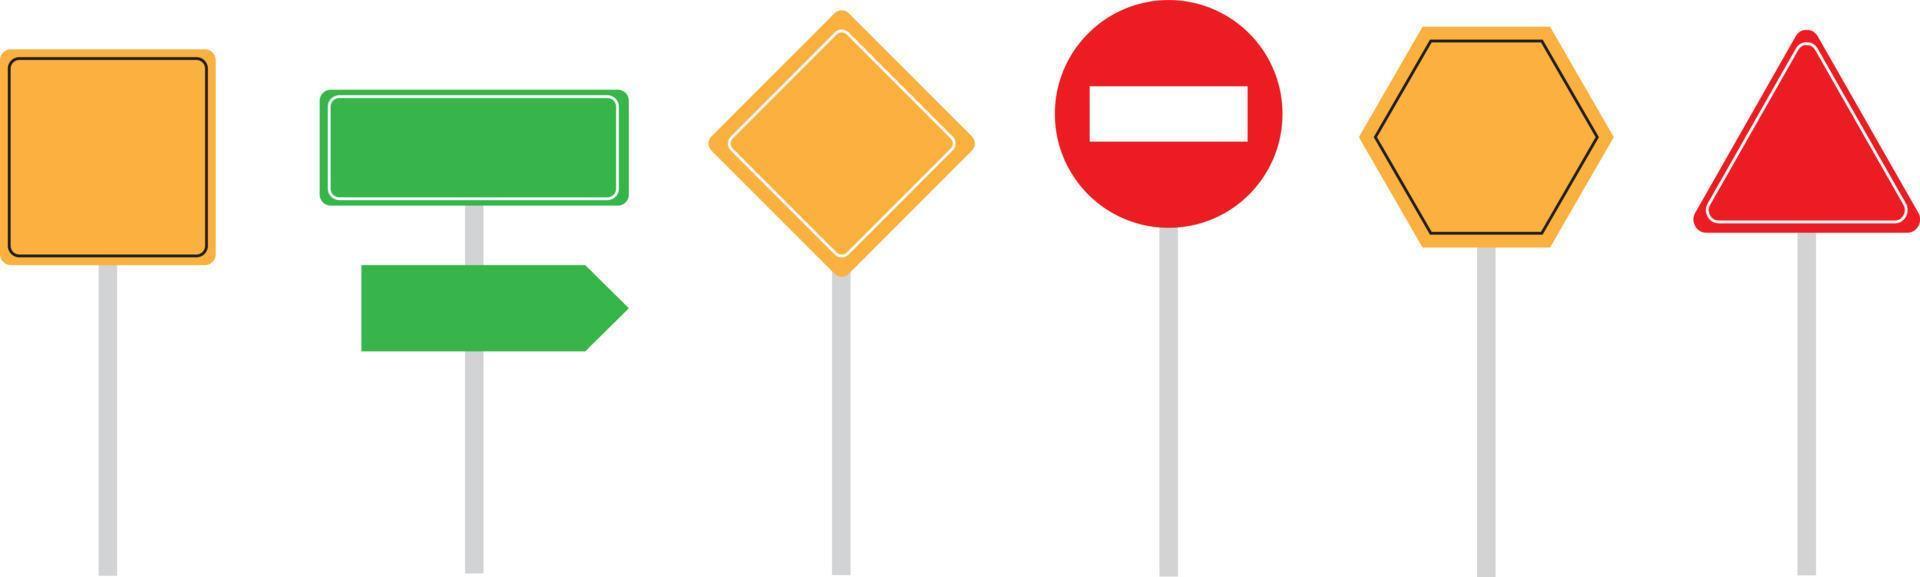 Blank traffic road sign set, empty street signs, colored isolated on white background, vector illustration.